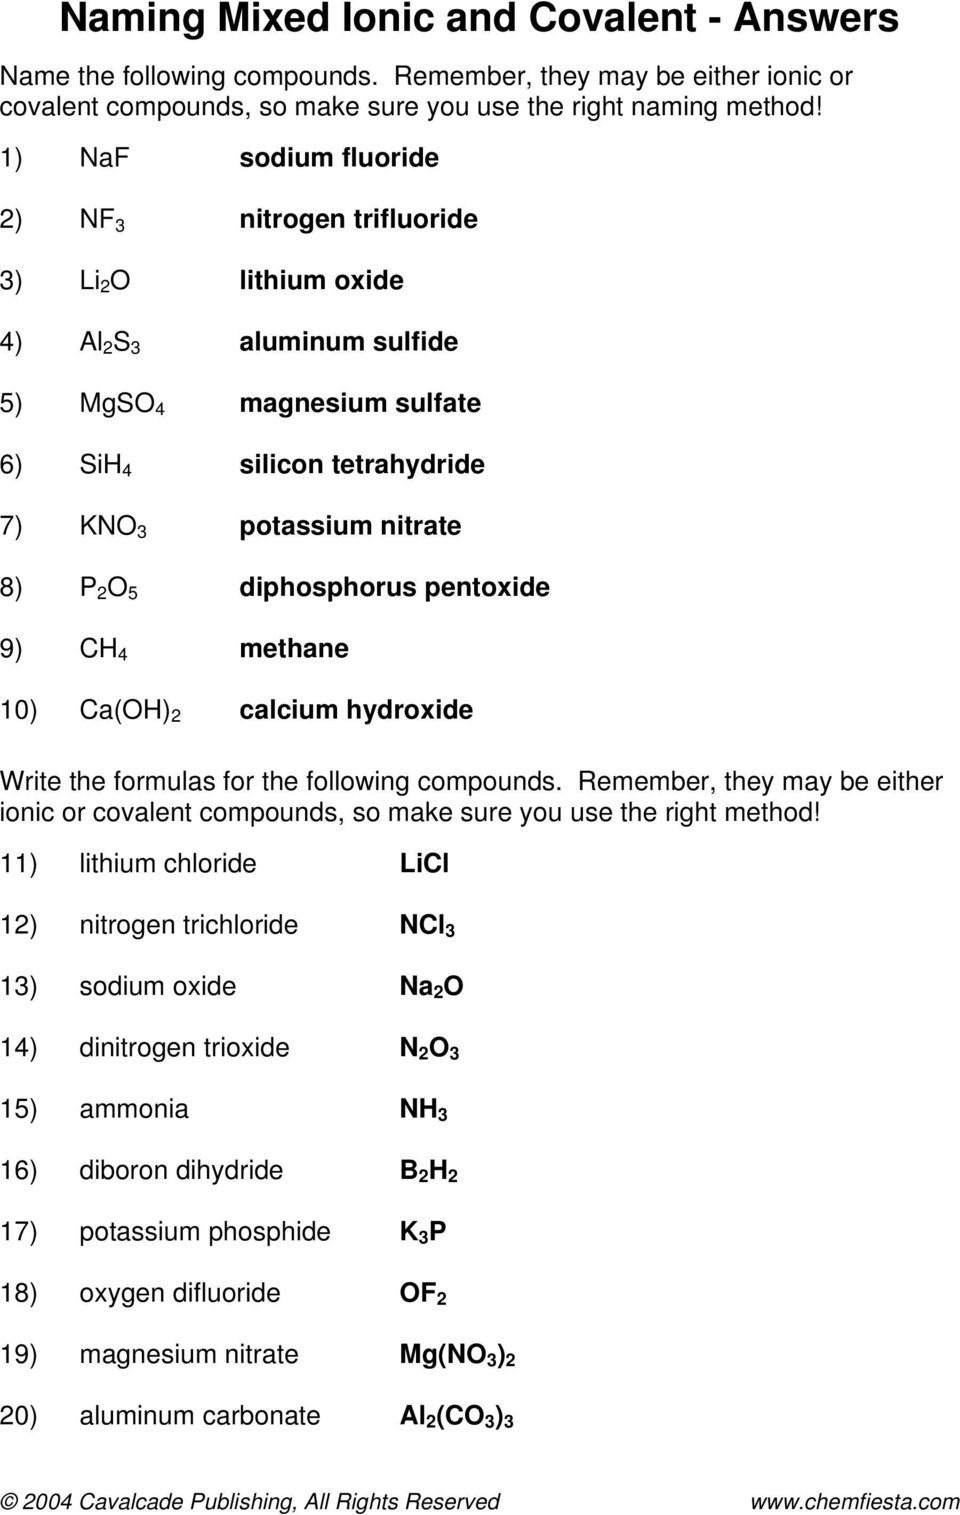 Naming Ionic Compounds Worksheet Answers Worksheet 23 Writing formulas Chemistry Answers